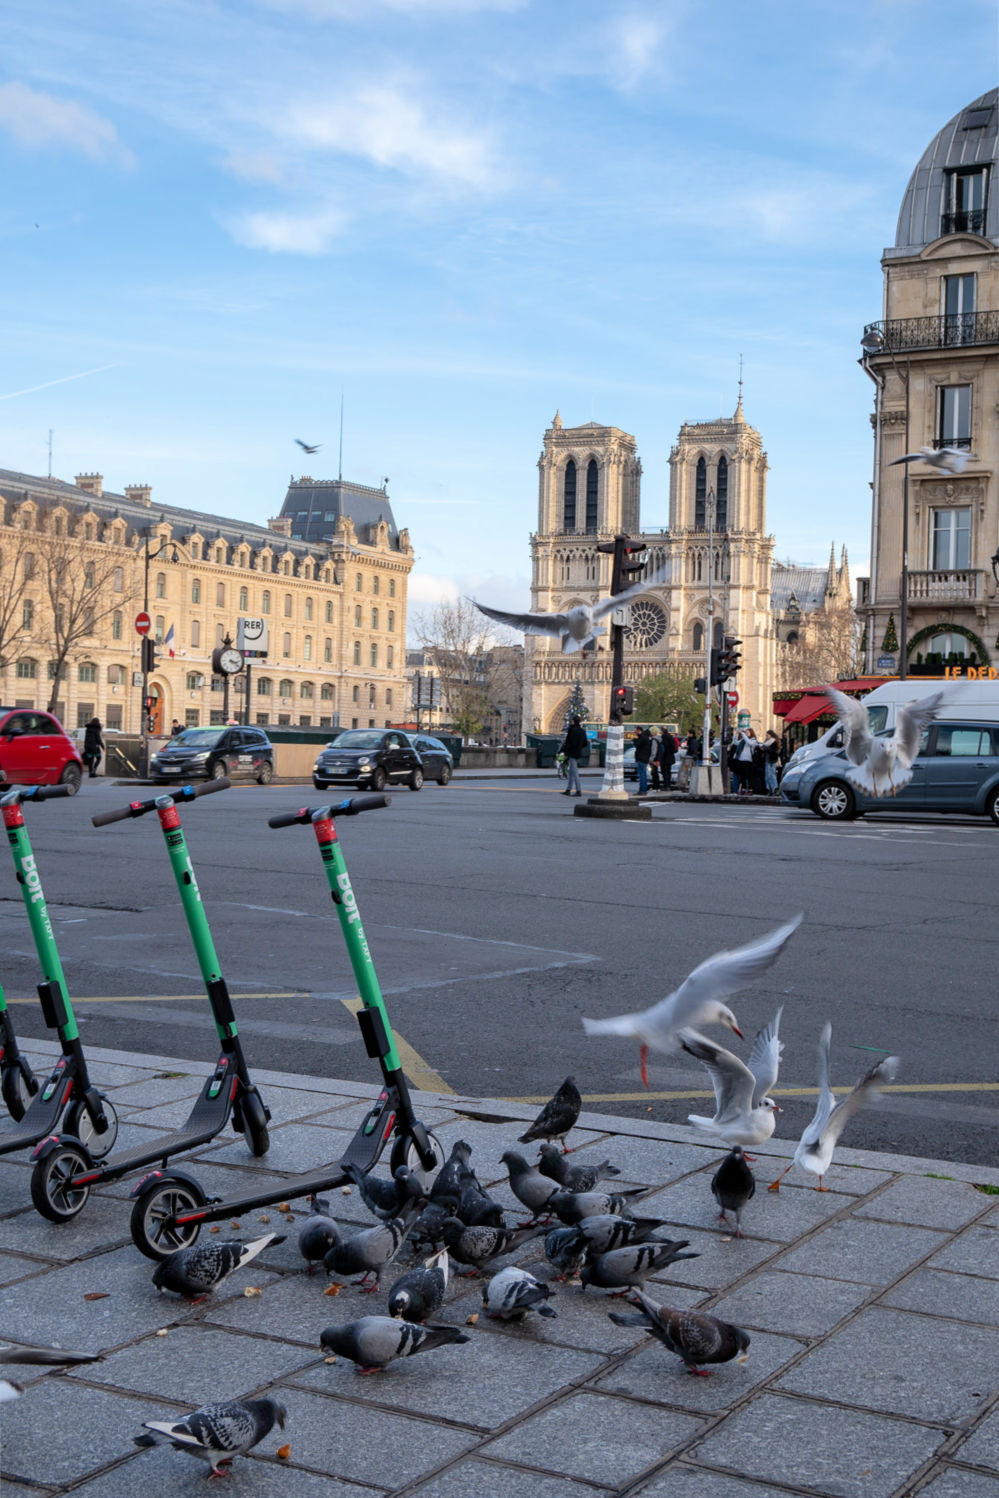 Electric scooters and pigeons near Saint Michel in Paris, with Notre Dame in background. Details at une femme d'un certain age.